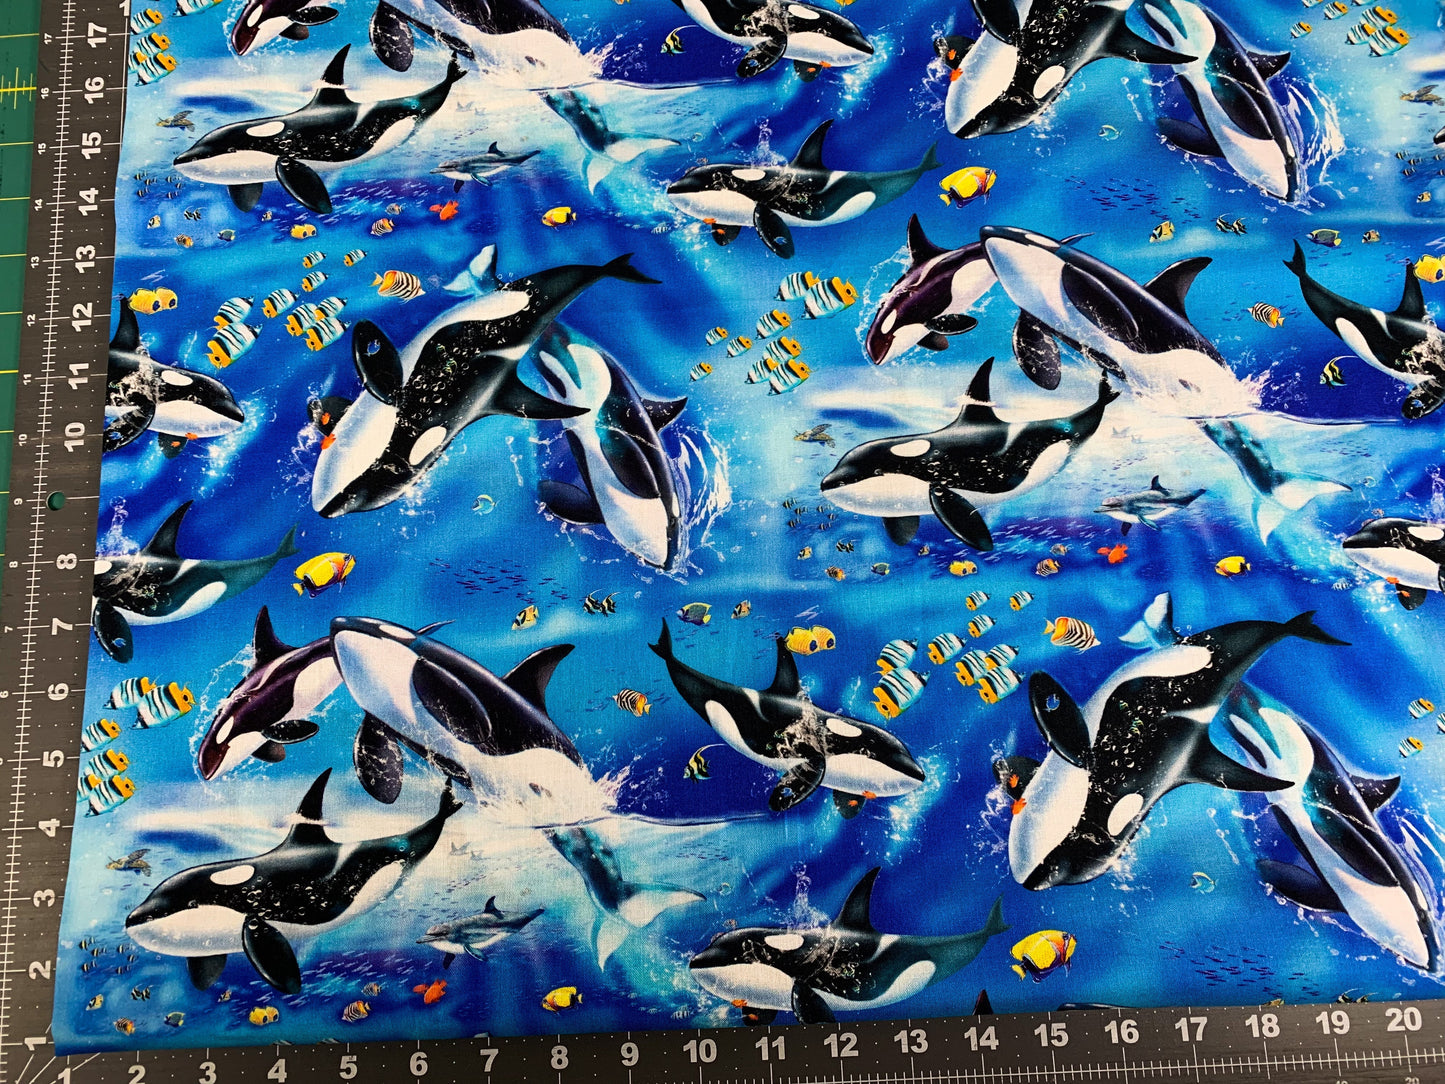 Blue Whale fabric 5754 whales cotton fabric